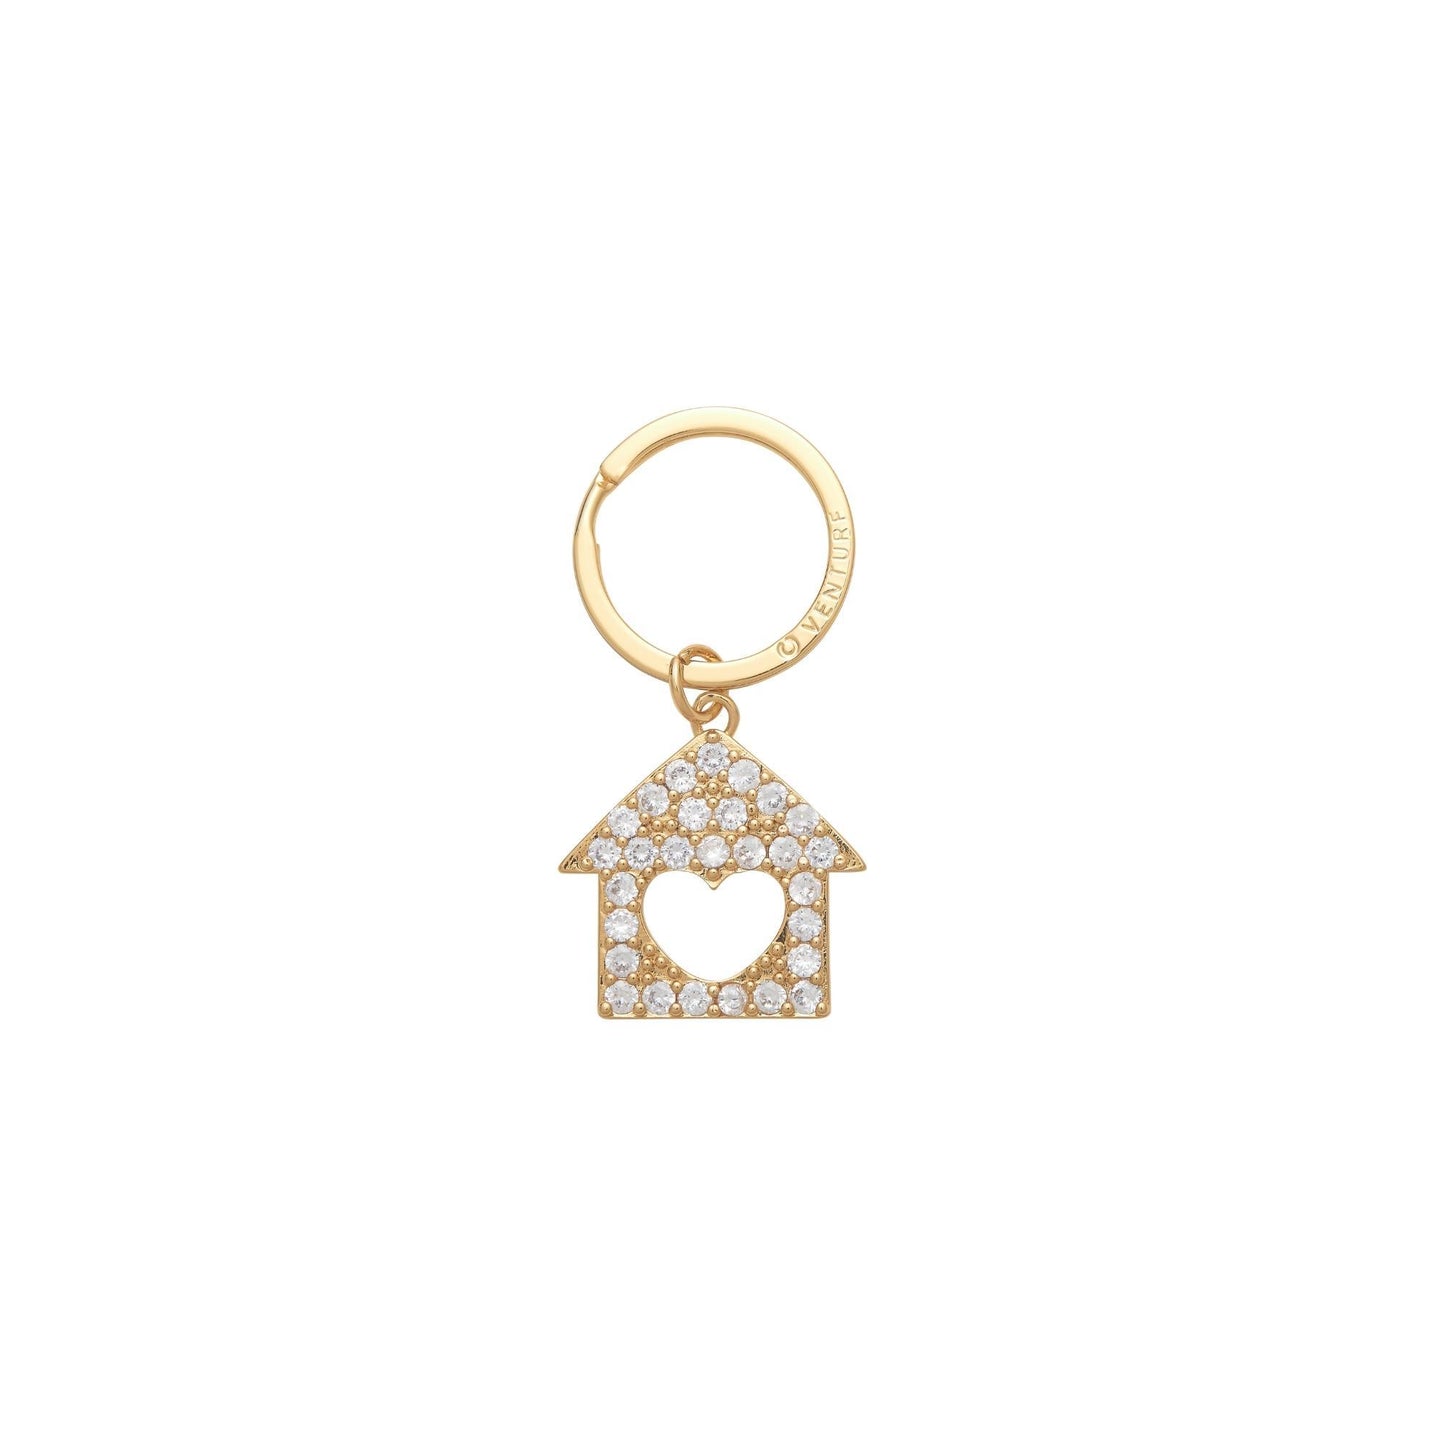 Home is where the heart is charm for keychain. Jeweled home with heart cutout on a split ring.